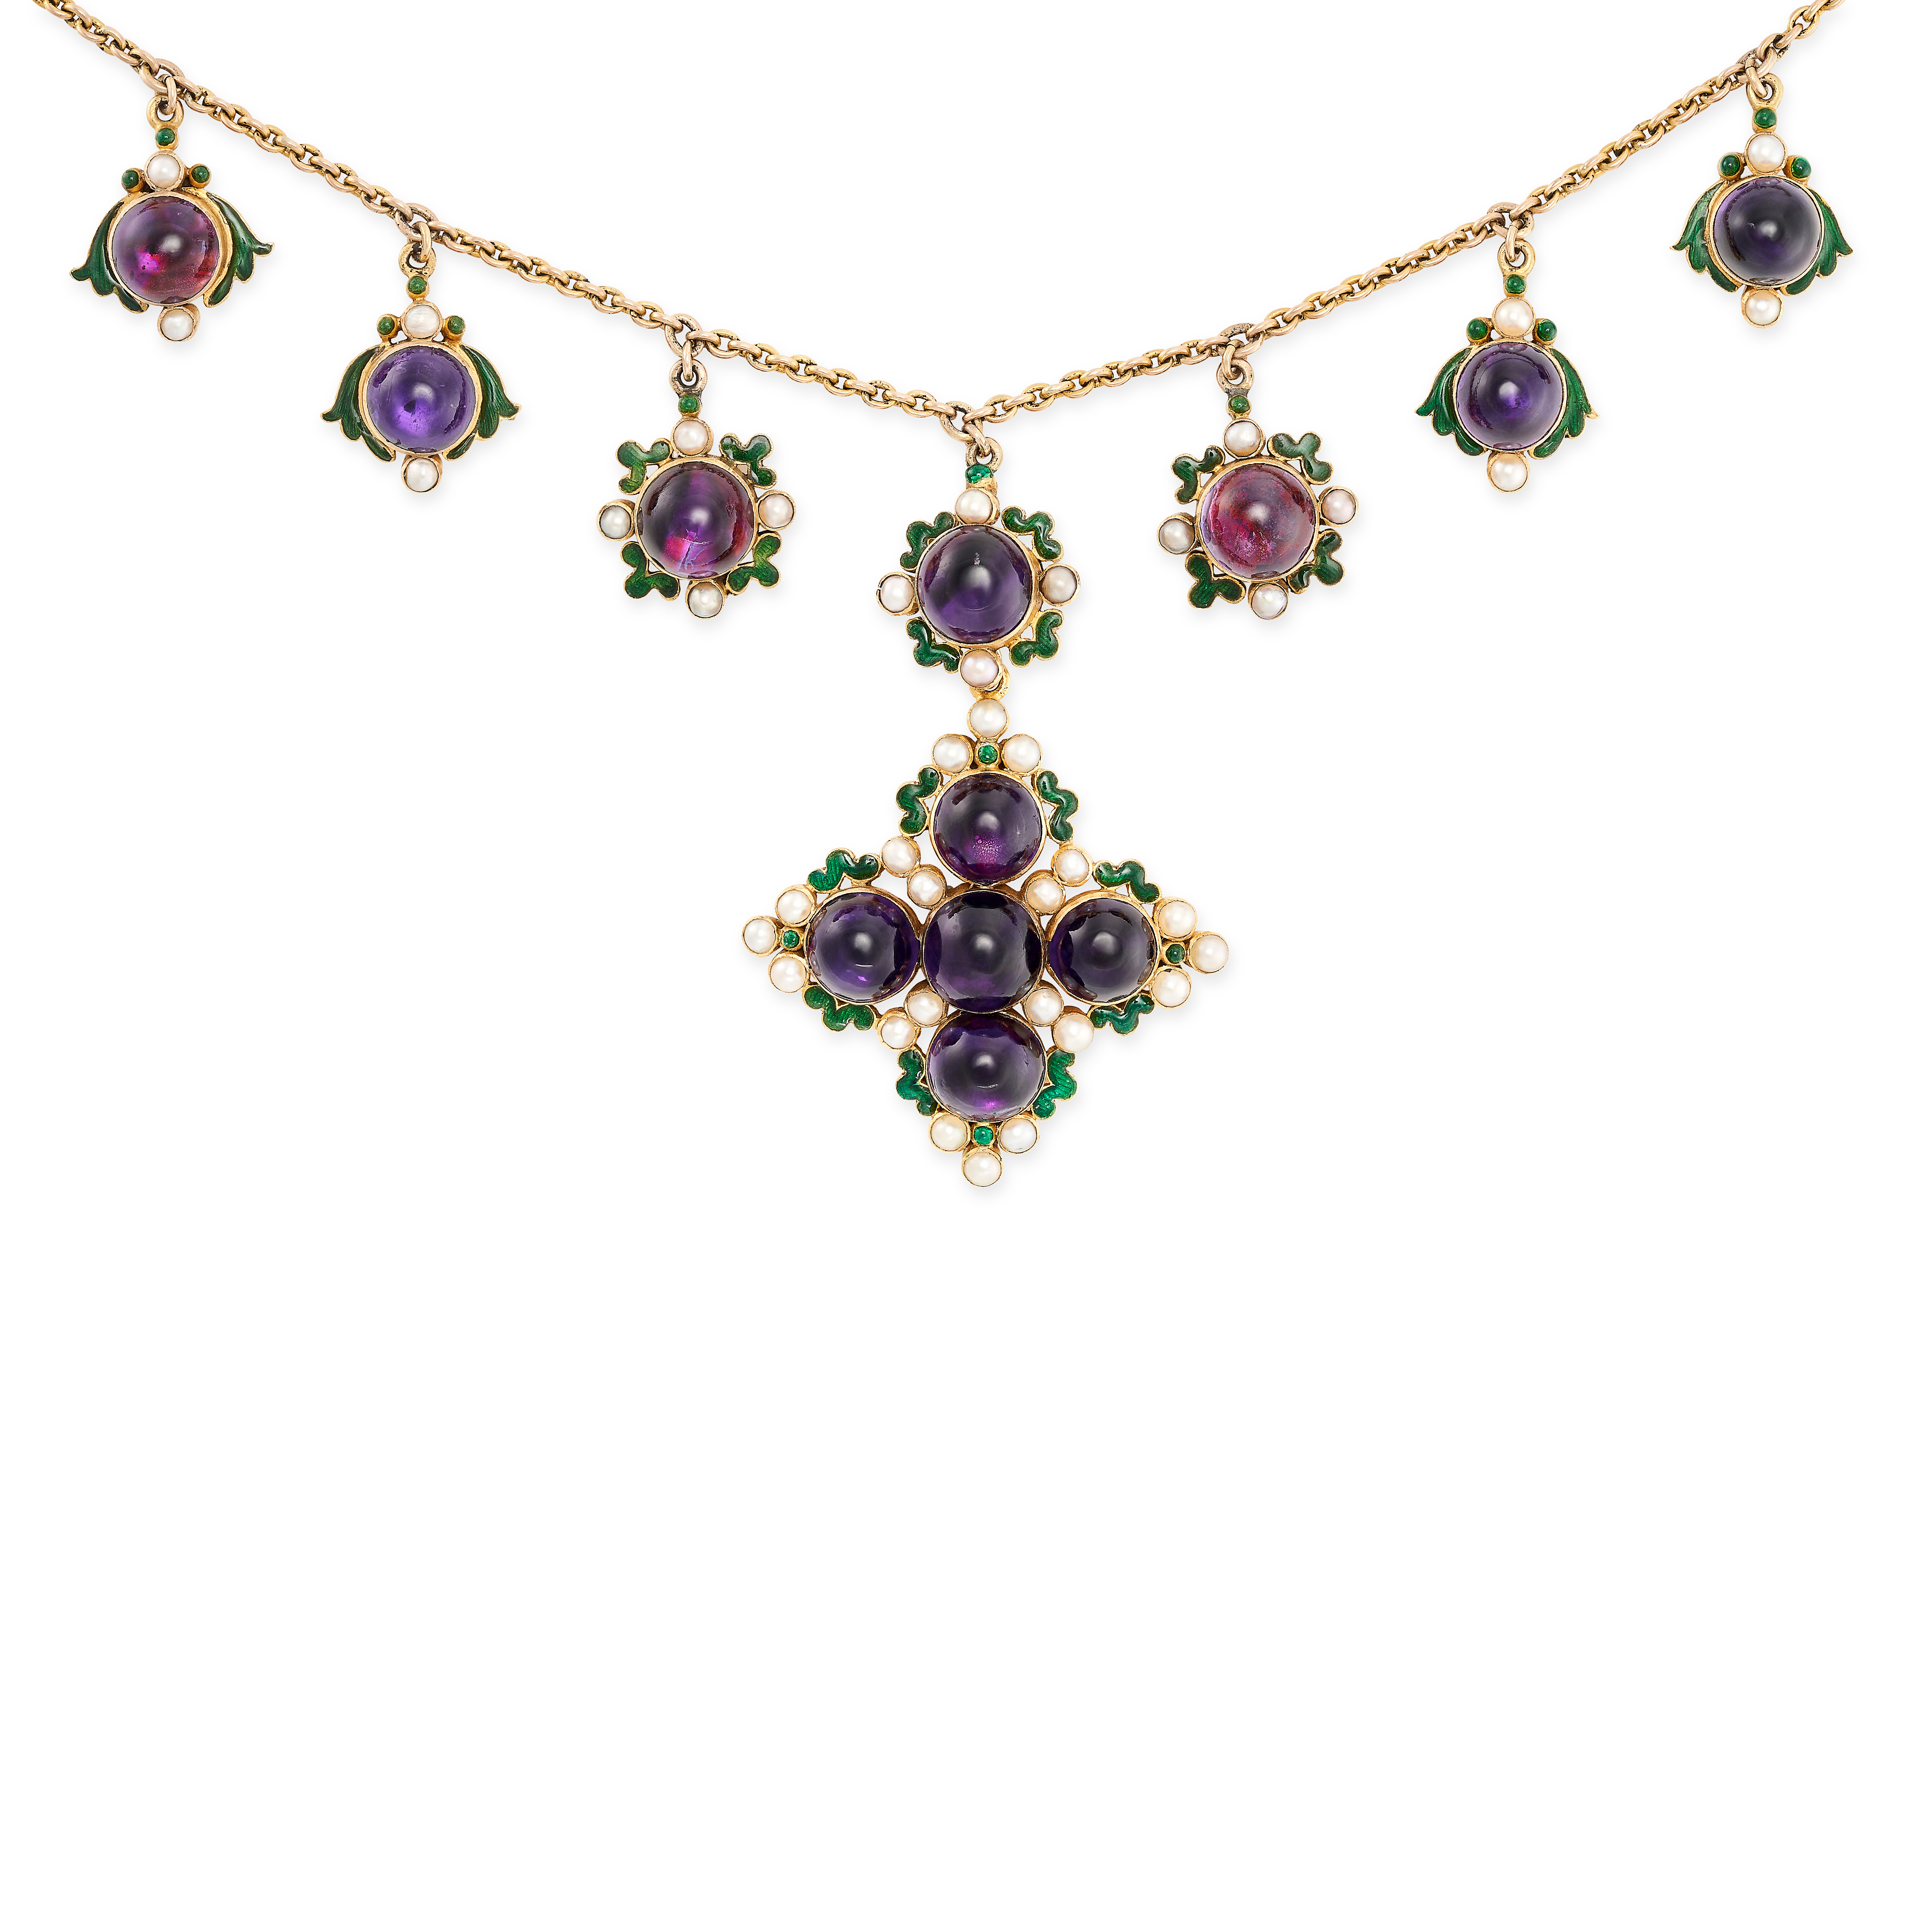 AN ANTIQUE AMETHYST, PEARL AND ENAMEL NECKLACE in yellow gold, comprising a trace chain suspending